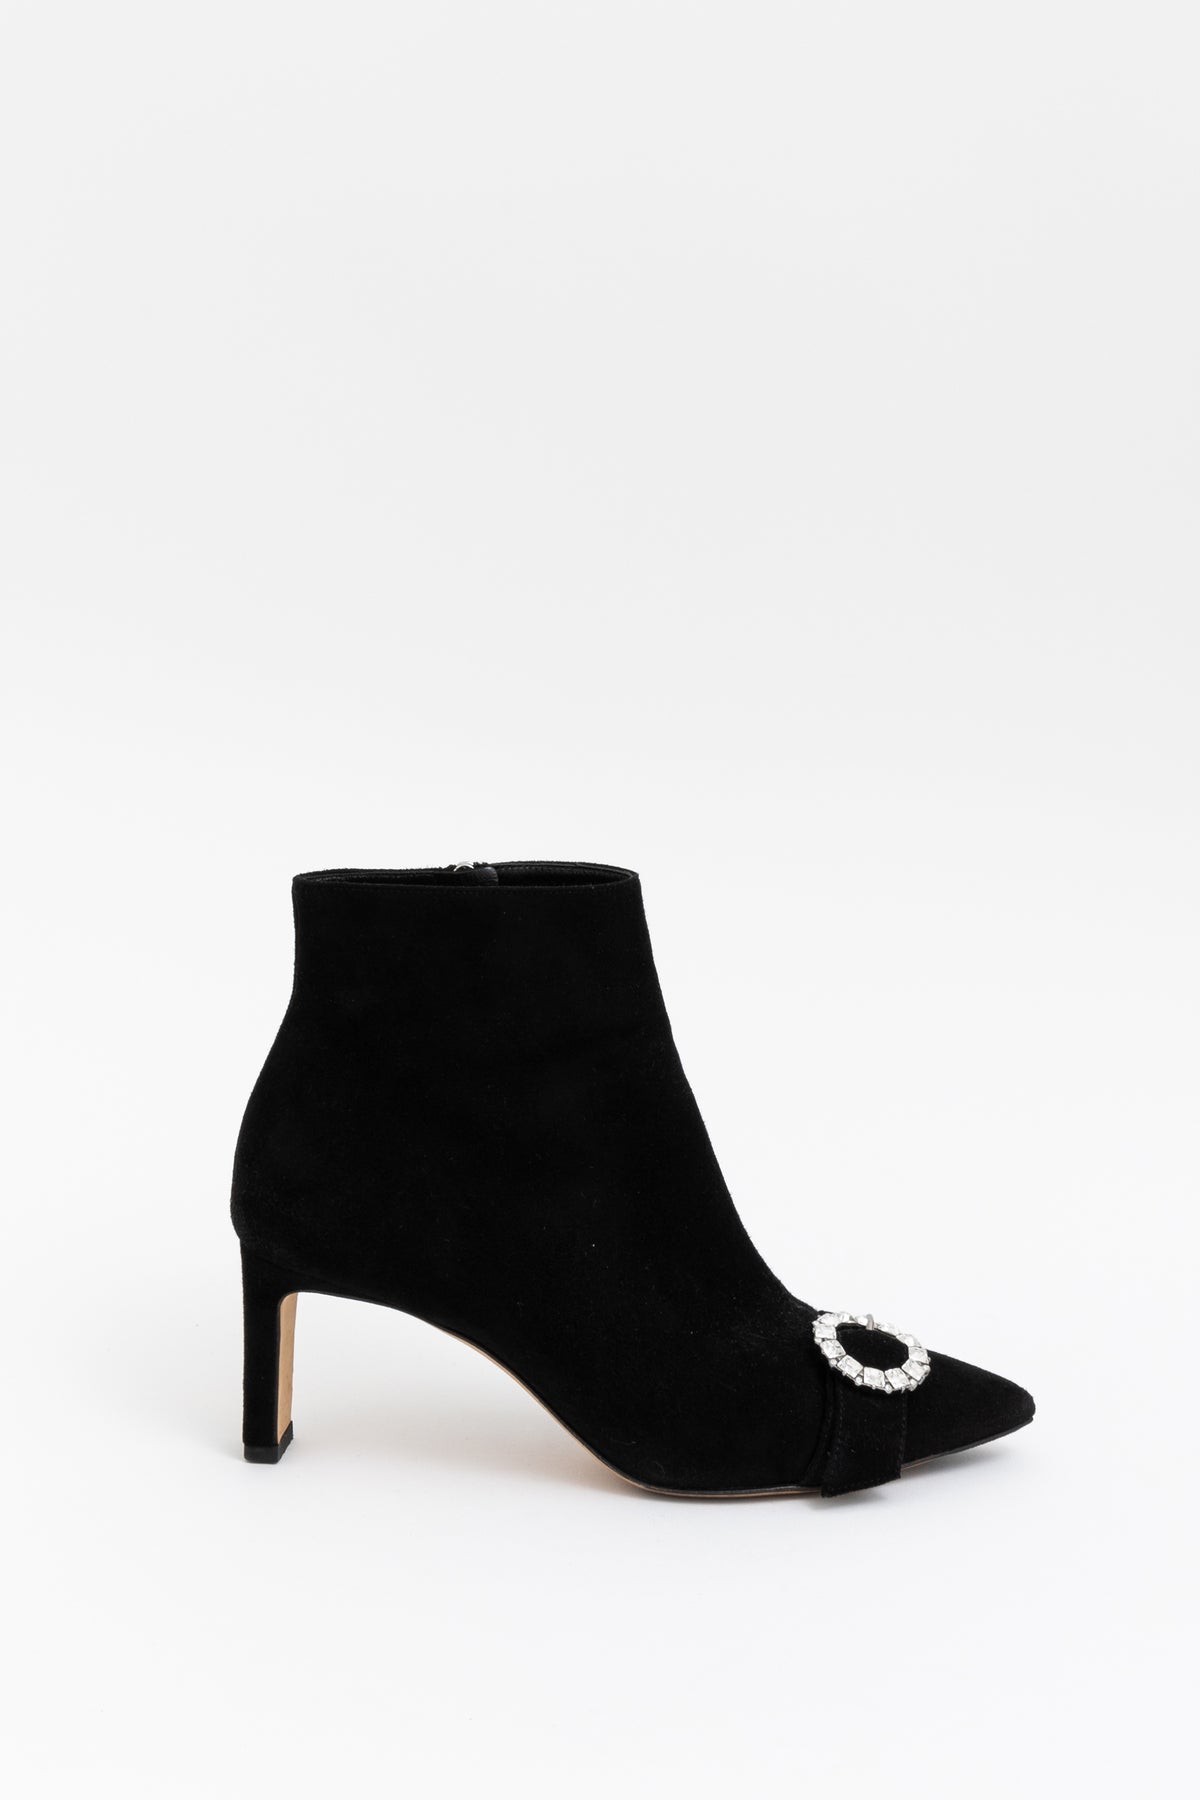 Hanover Suede Boot